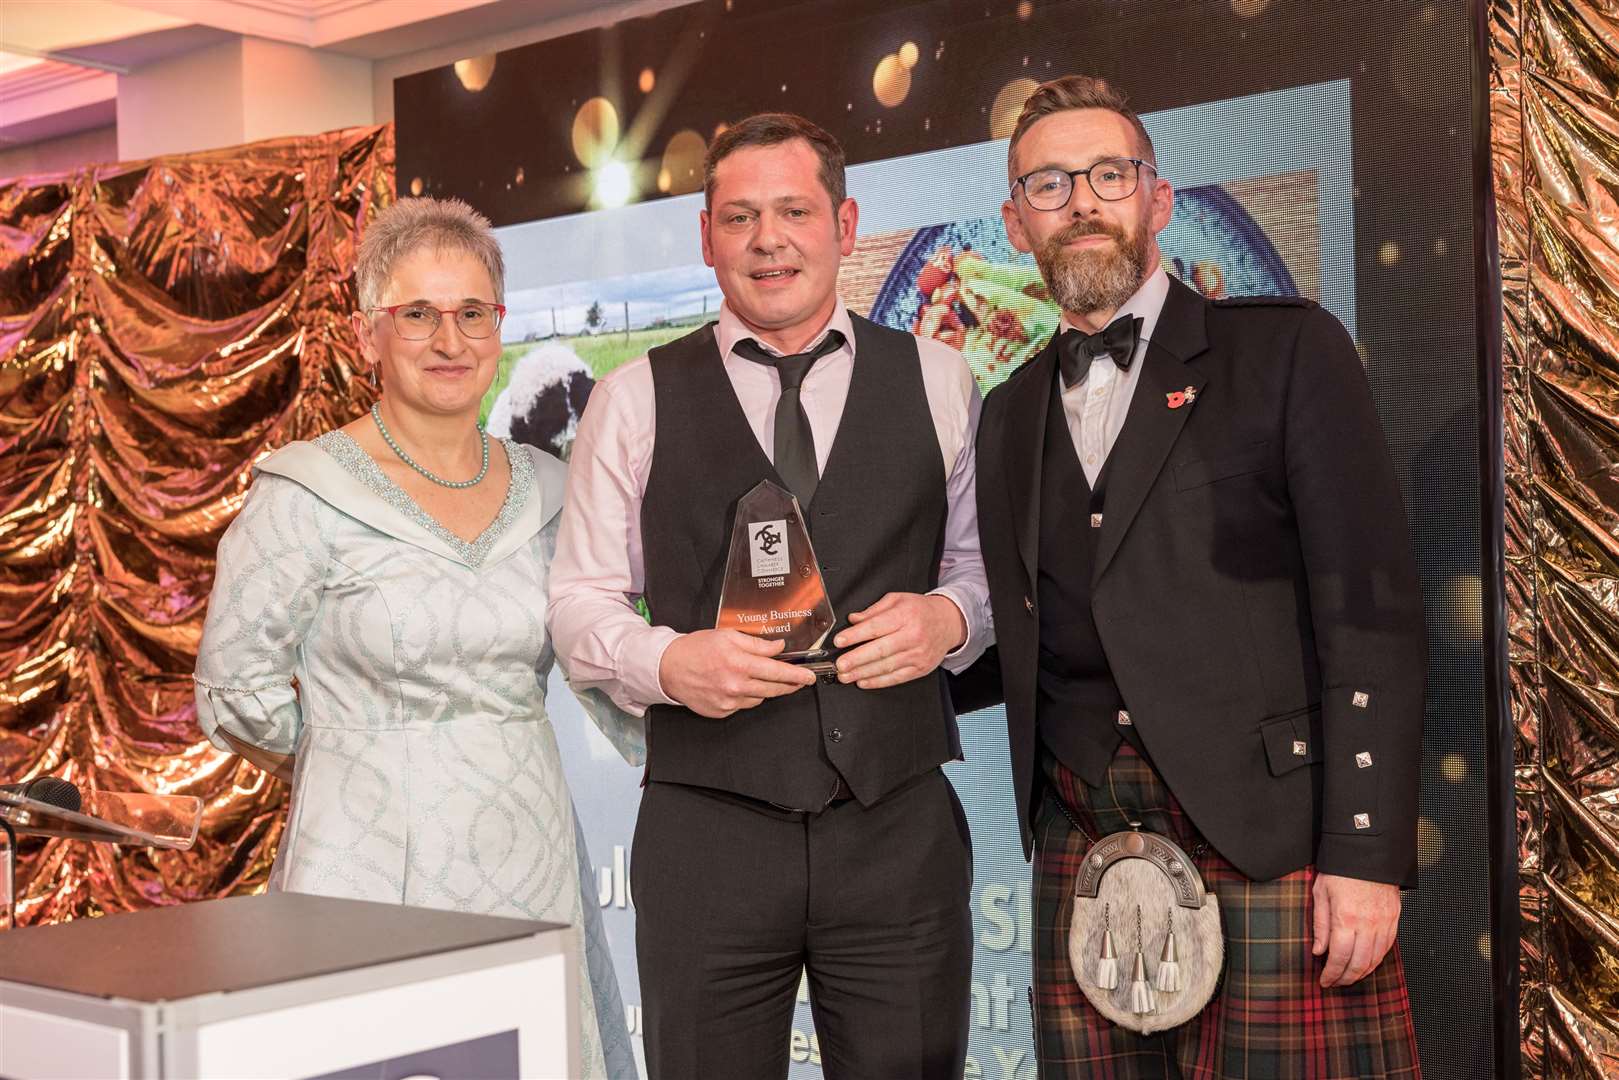 From left, Trudy Morris, CEO Caithness Chamber of Commerce, Greg Hooker owner of Puldagon Farm and Restaurant and David Armour of Pentland Floating Offshore Wind, sponsors of the Young Business Award. Picture: Studiograff Photo